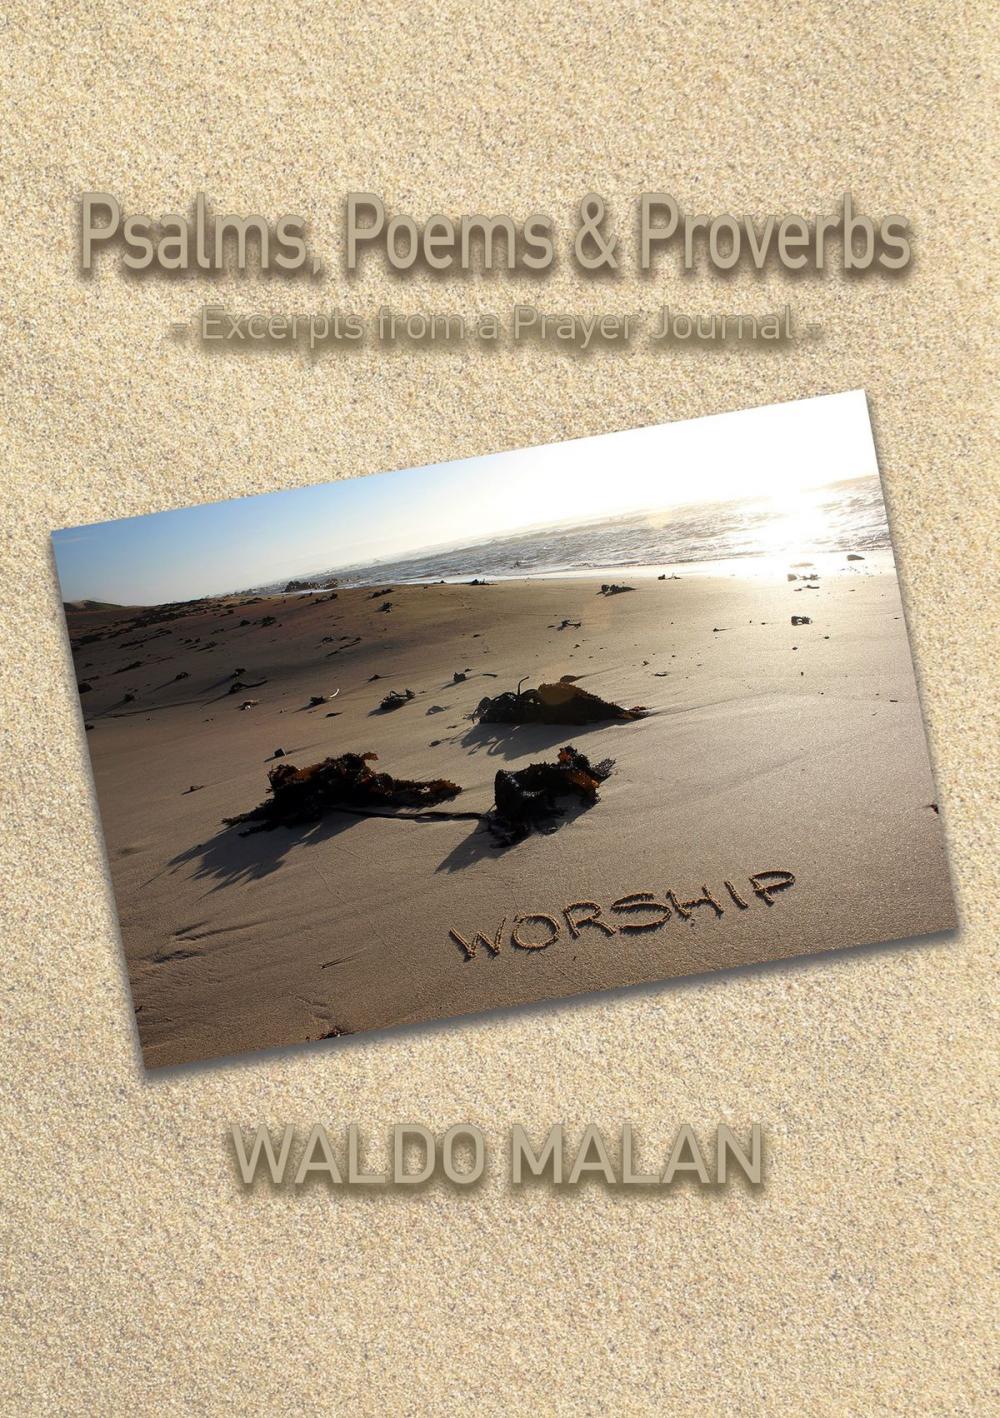 Big bigCover of Psalms, Poems & Proverbs: Excerpts From A Prayer Journal